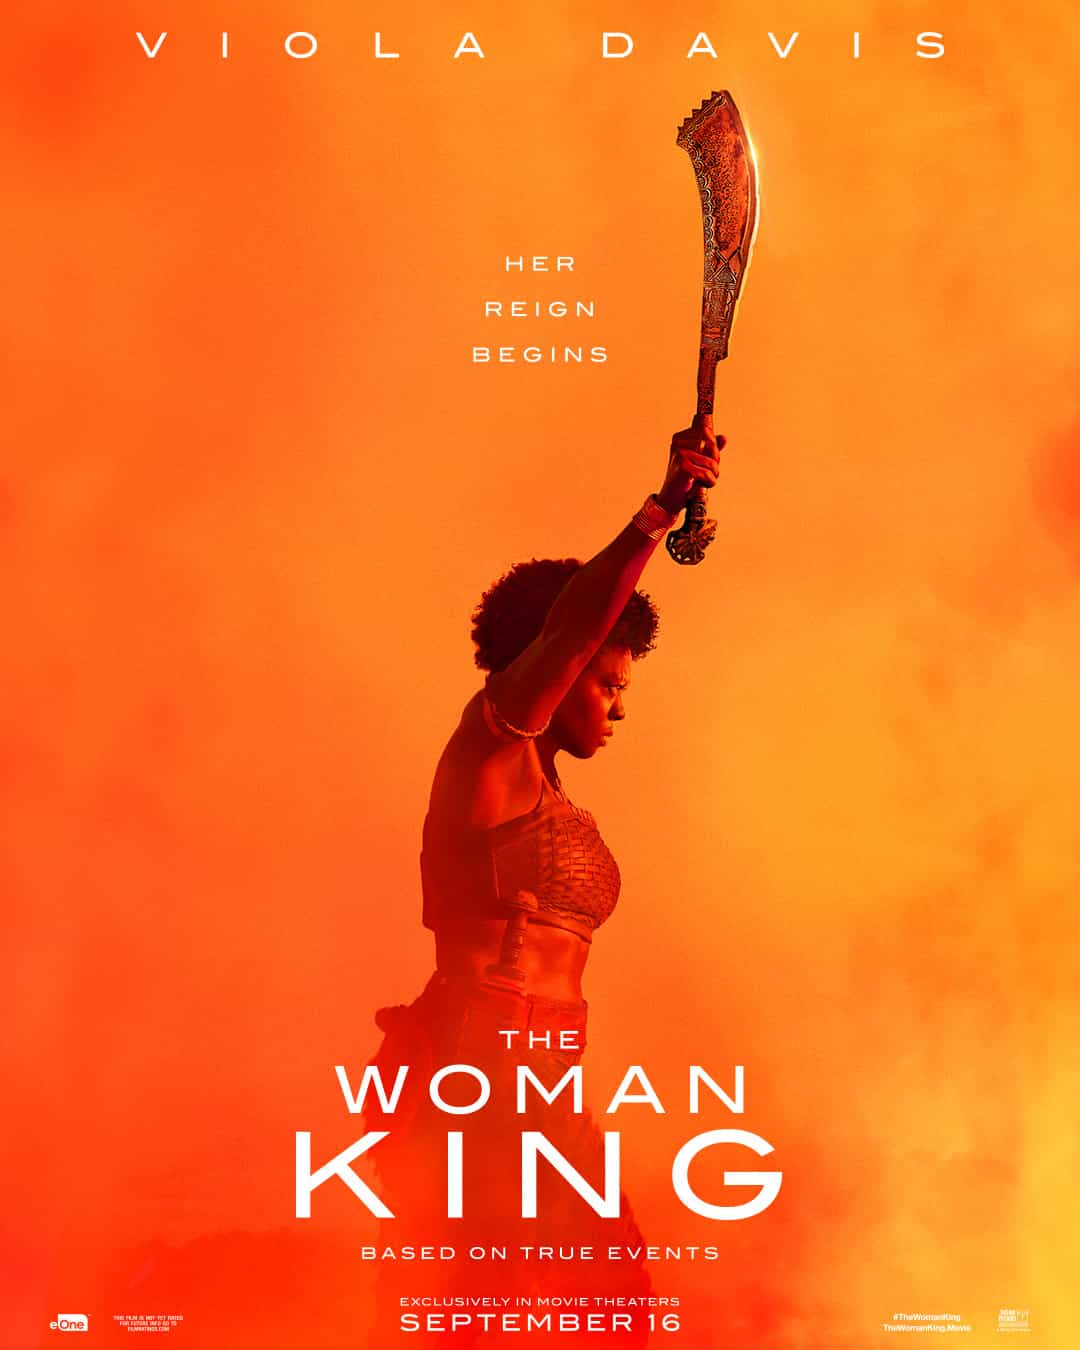 US Box Office Weekend Report 16th - 18th September 2022: The Woman King makes its debut at the top of the North American box office with $19 Million